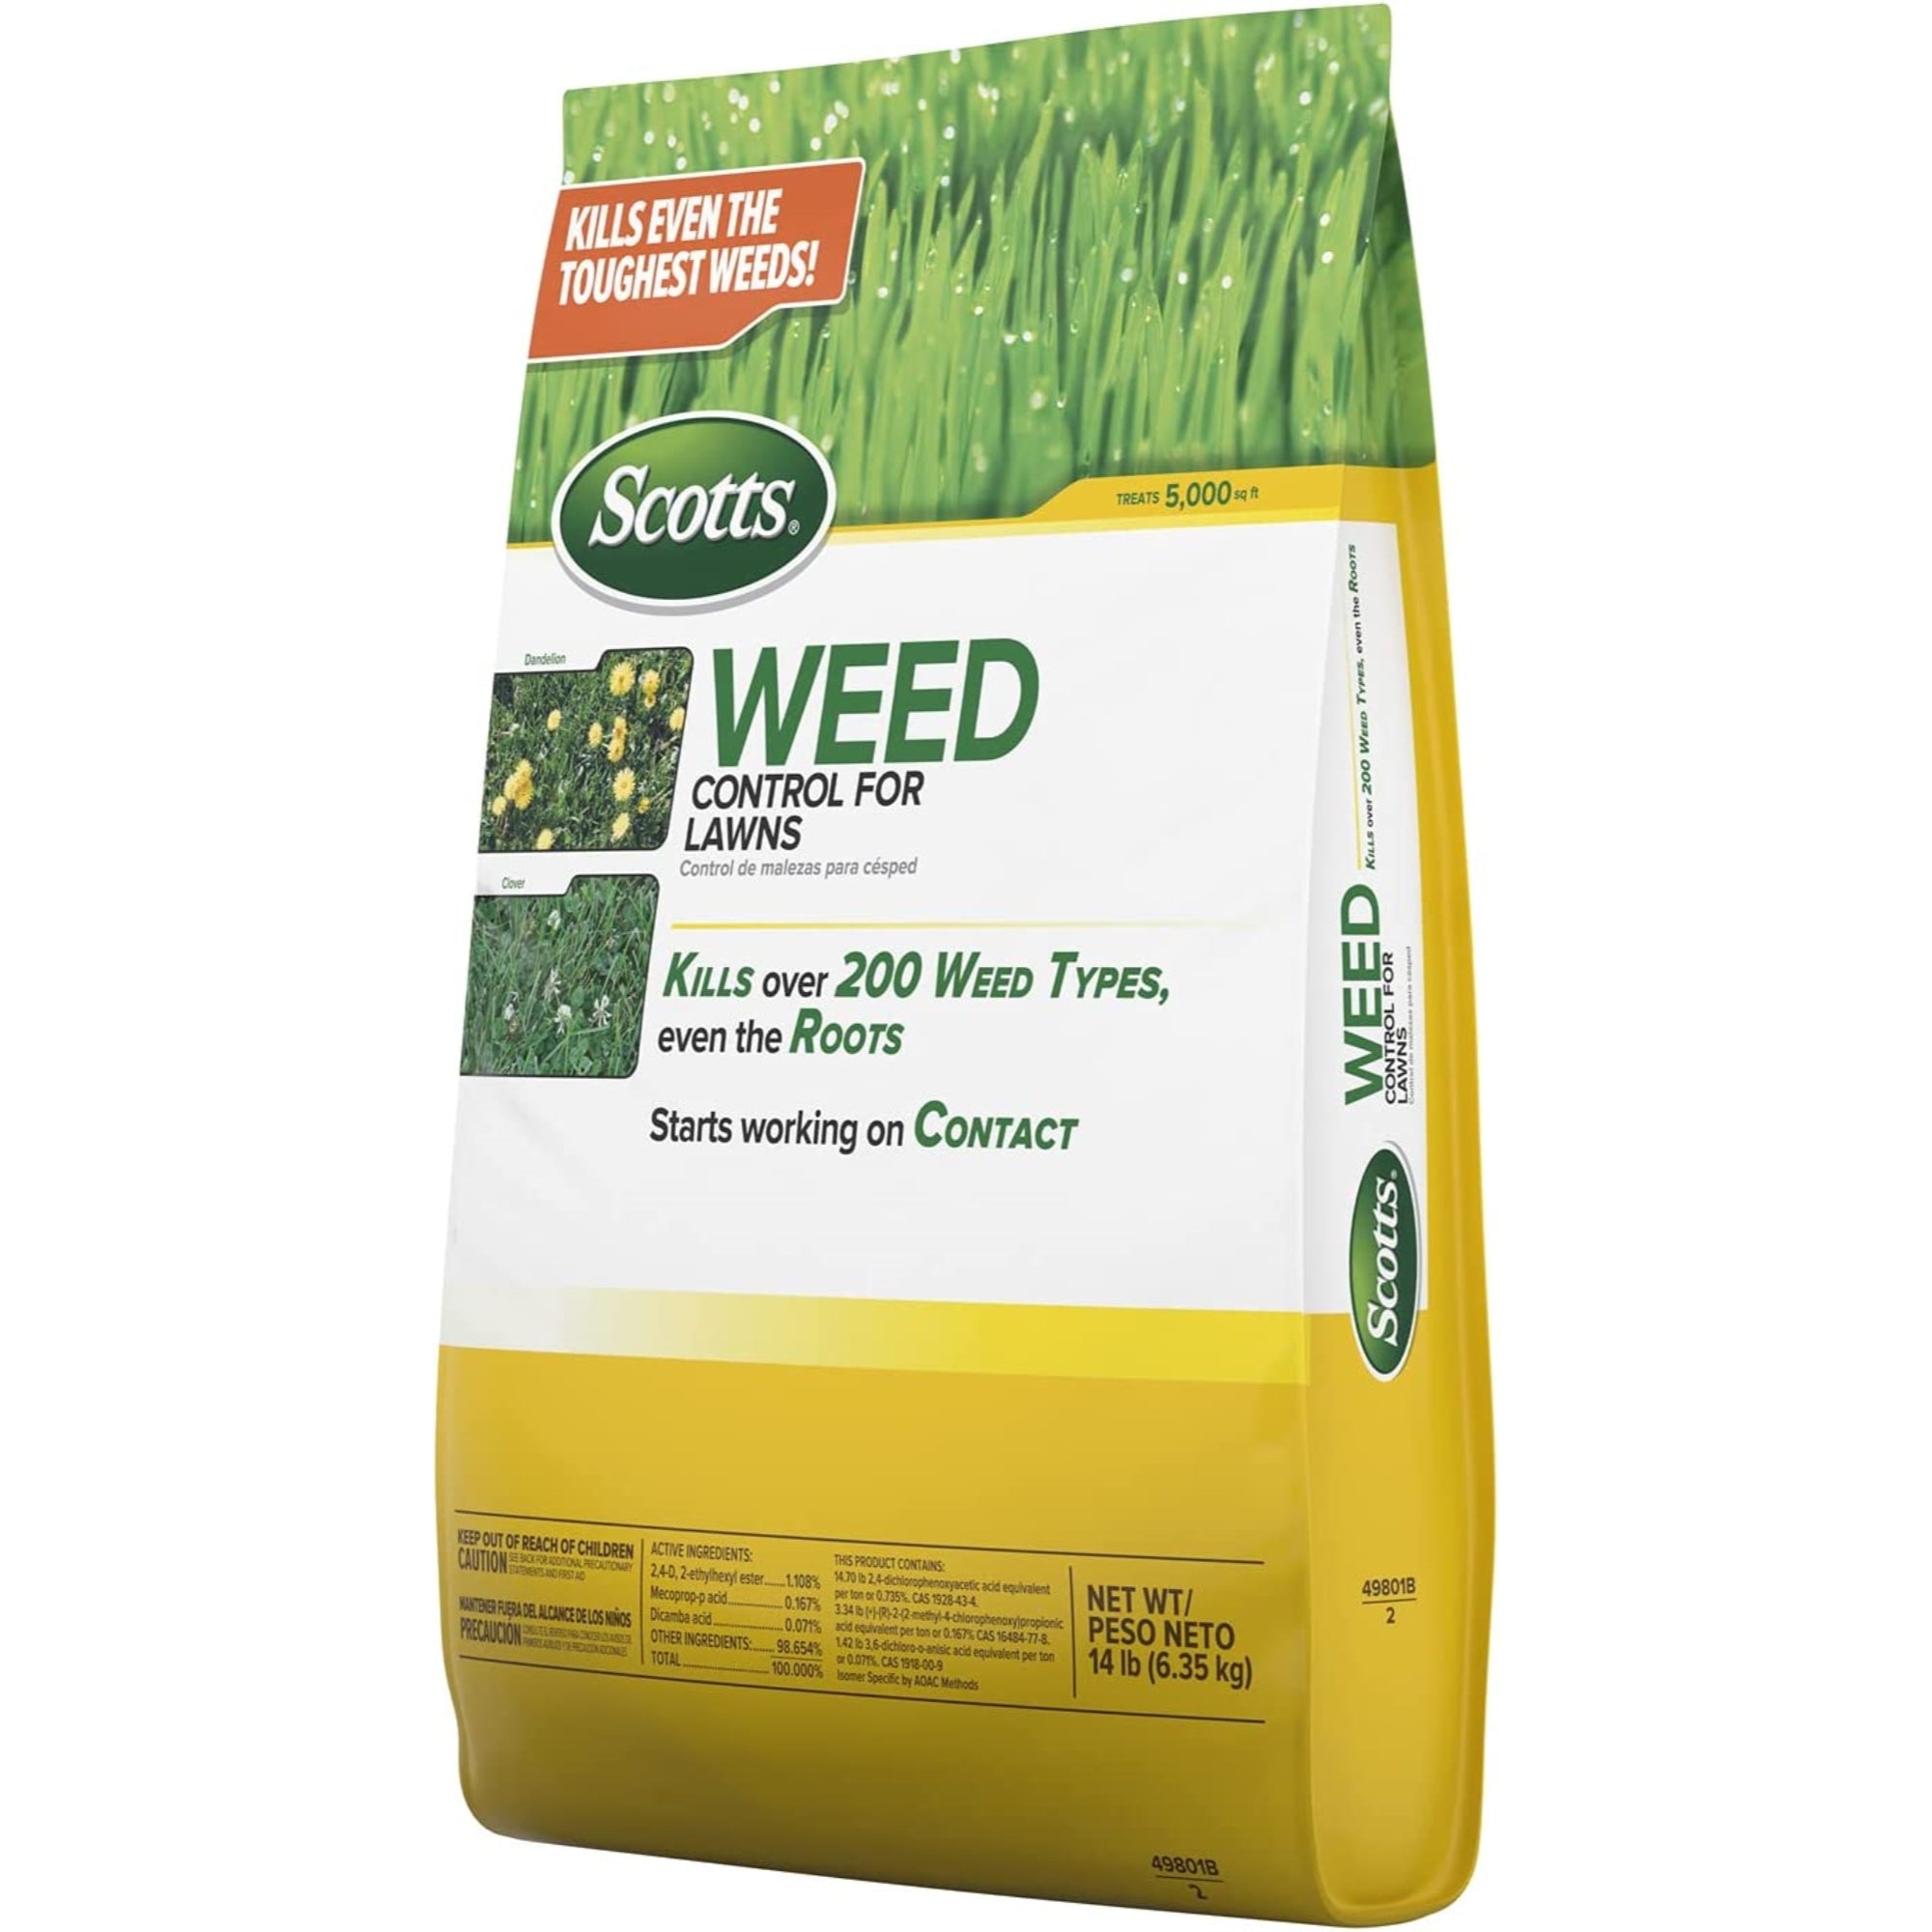 Scotts Granular Weed Control for Lawns, Covers 5,000 SqFt, 14lb Bag